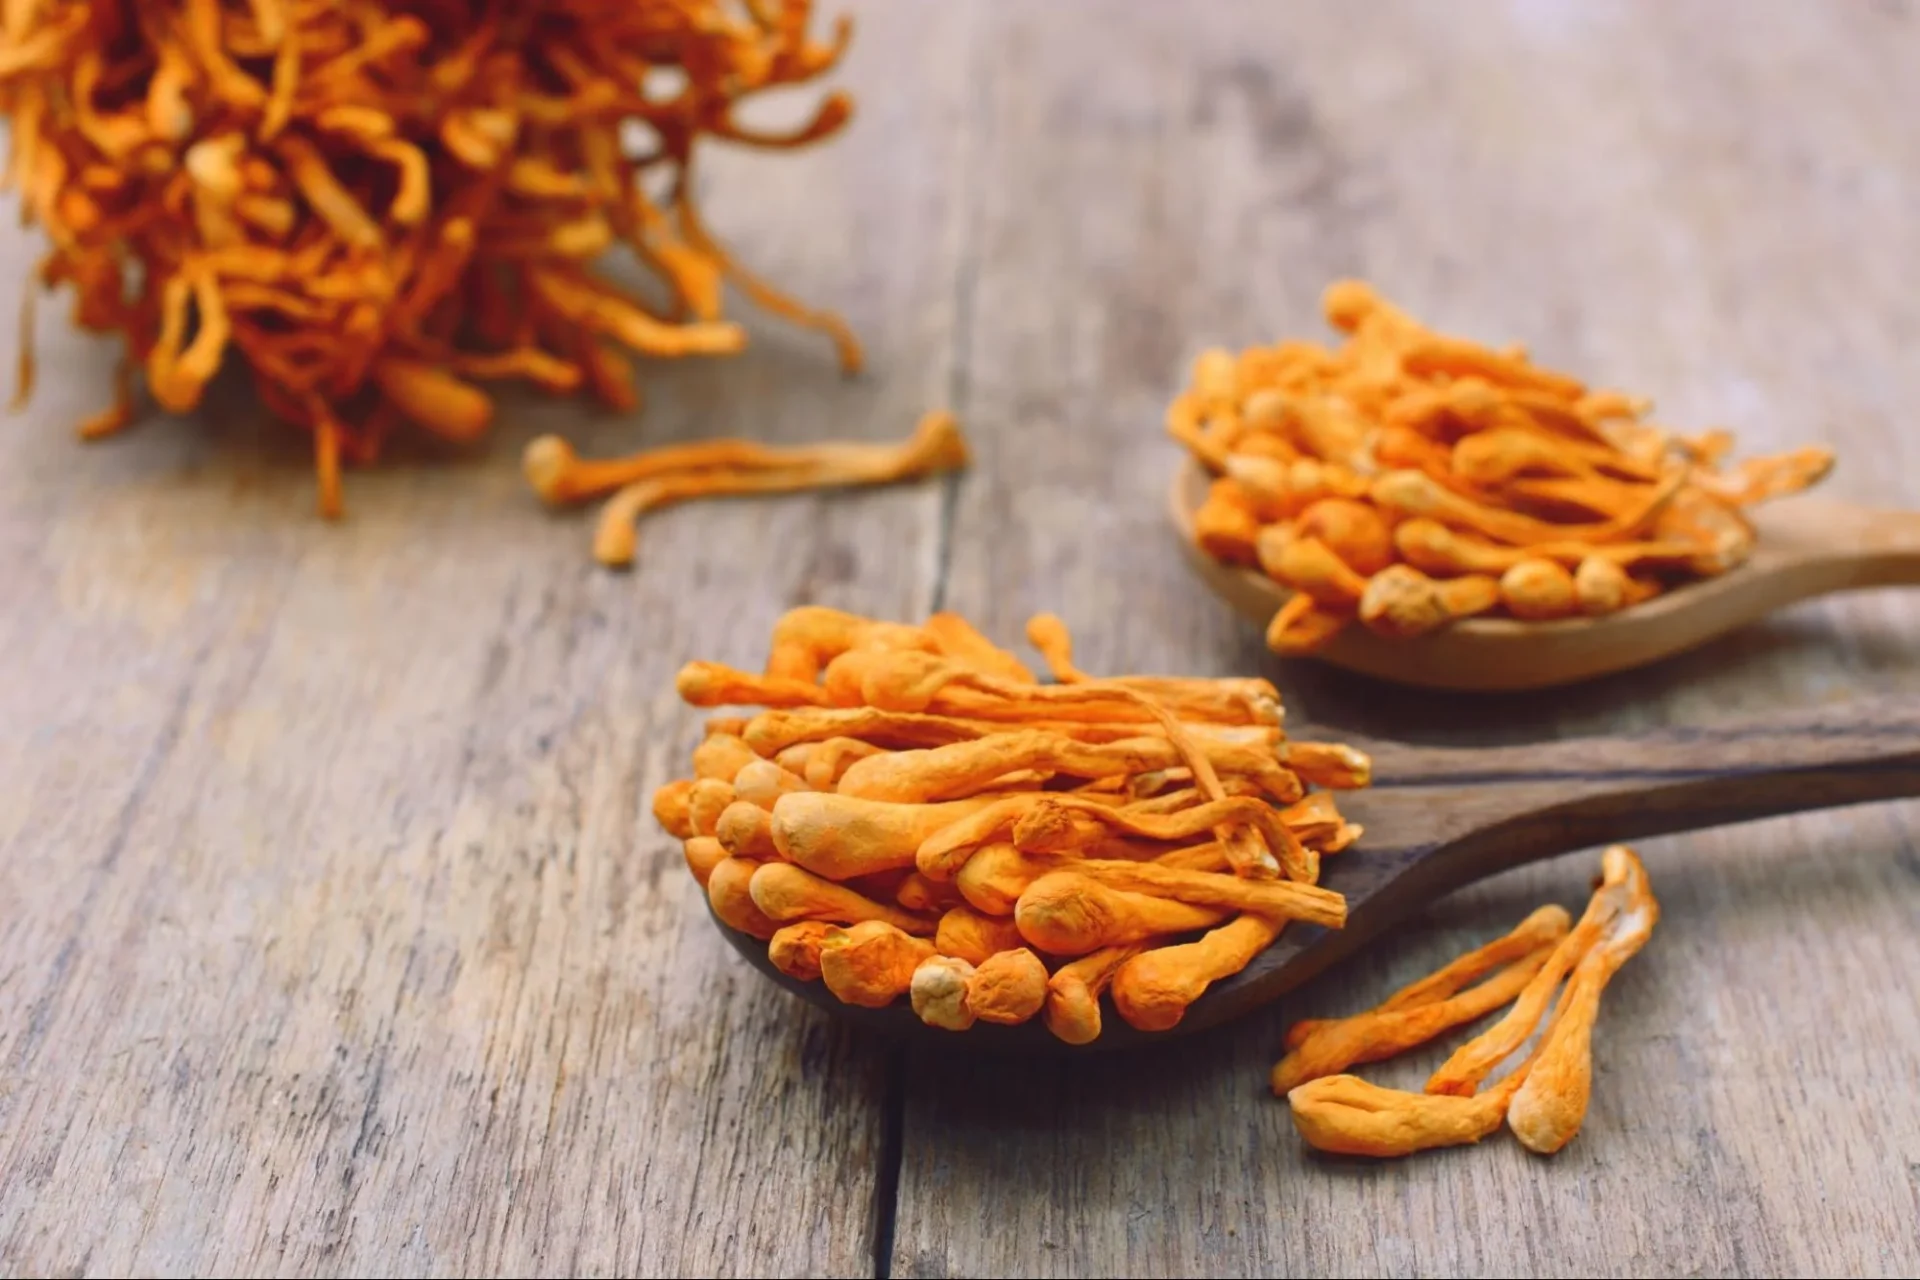 Cordyceps militaris | This Mushroom Can Help Your Cardio and Cognition, But It Won’t Take Control Of Your Brain…Unless You’re A Caterpillar